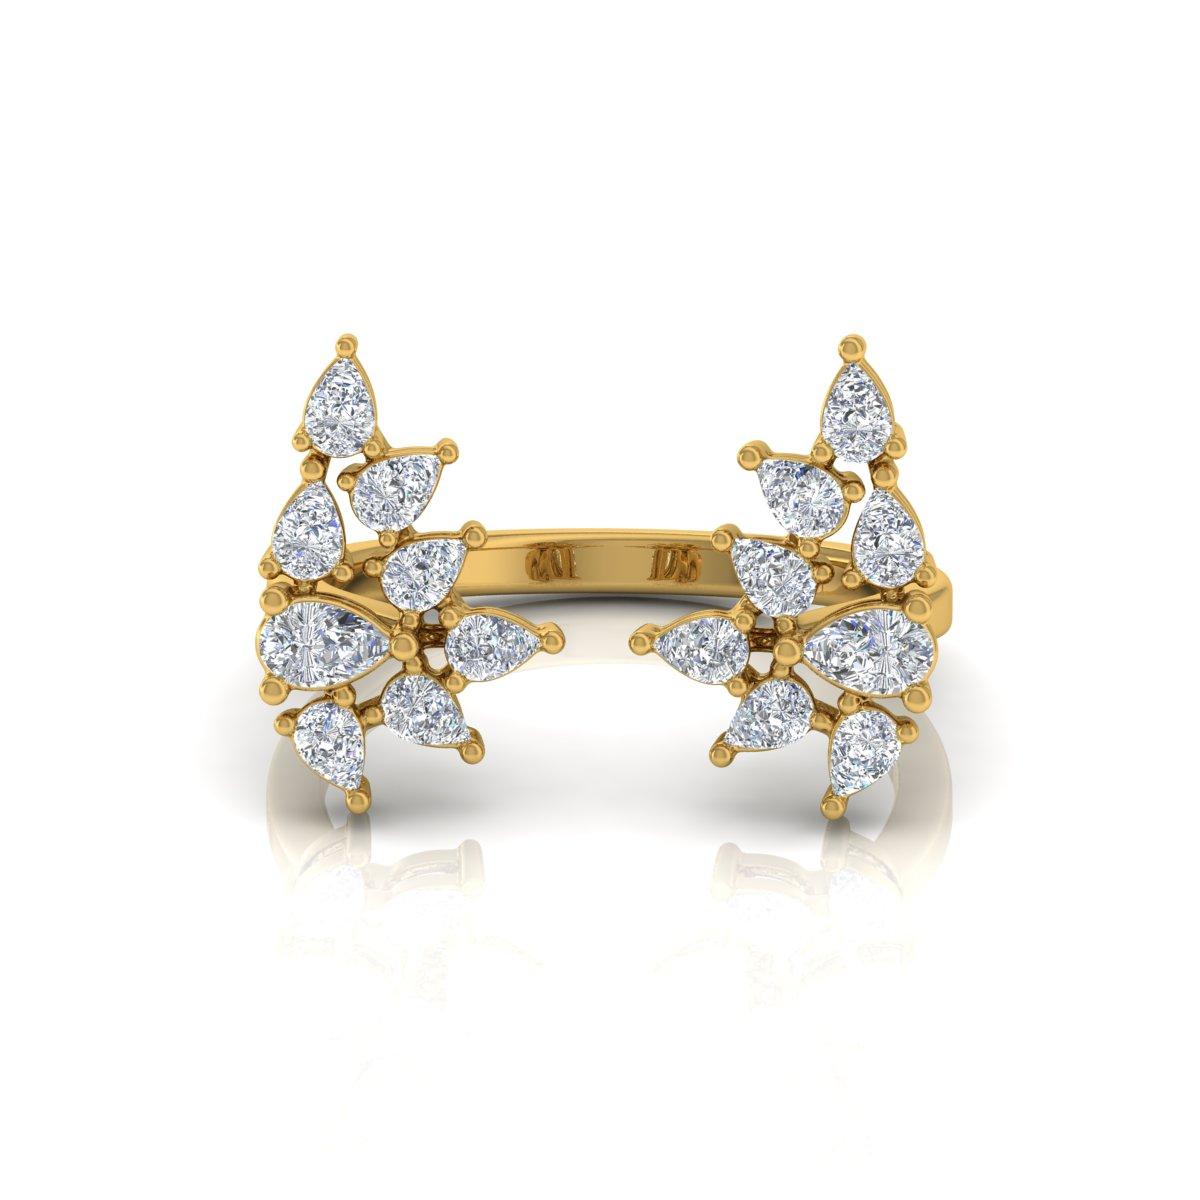 For Sale:  1.30 Carat SI Clarity HI Color Pear Diamond Cuff Ring 18k Yellow Gold Jewelry 5